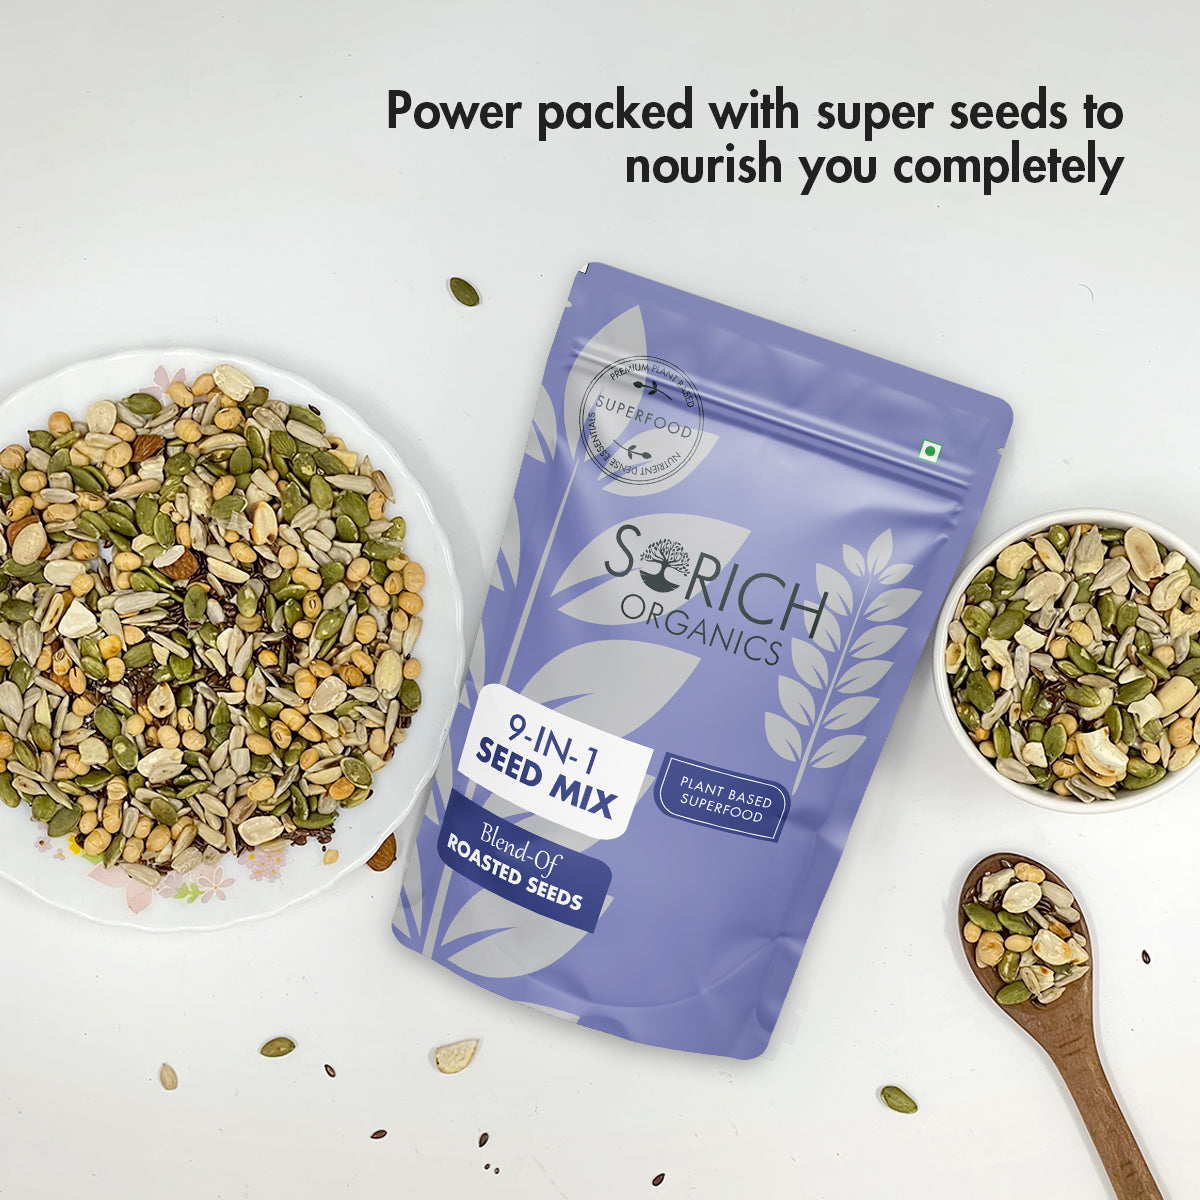 9 in 1 Seeds Mix - Sorich